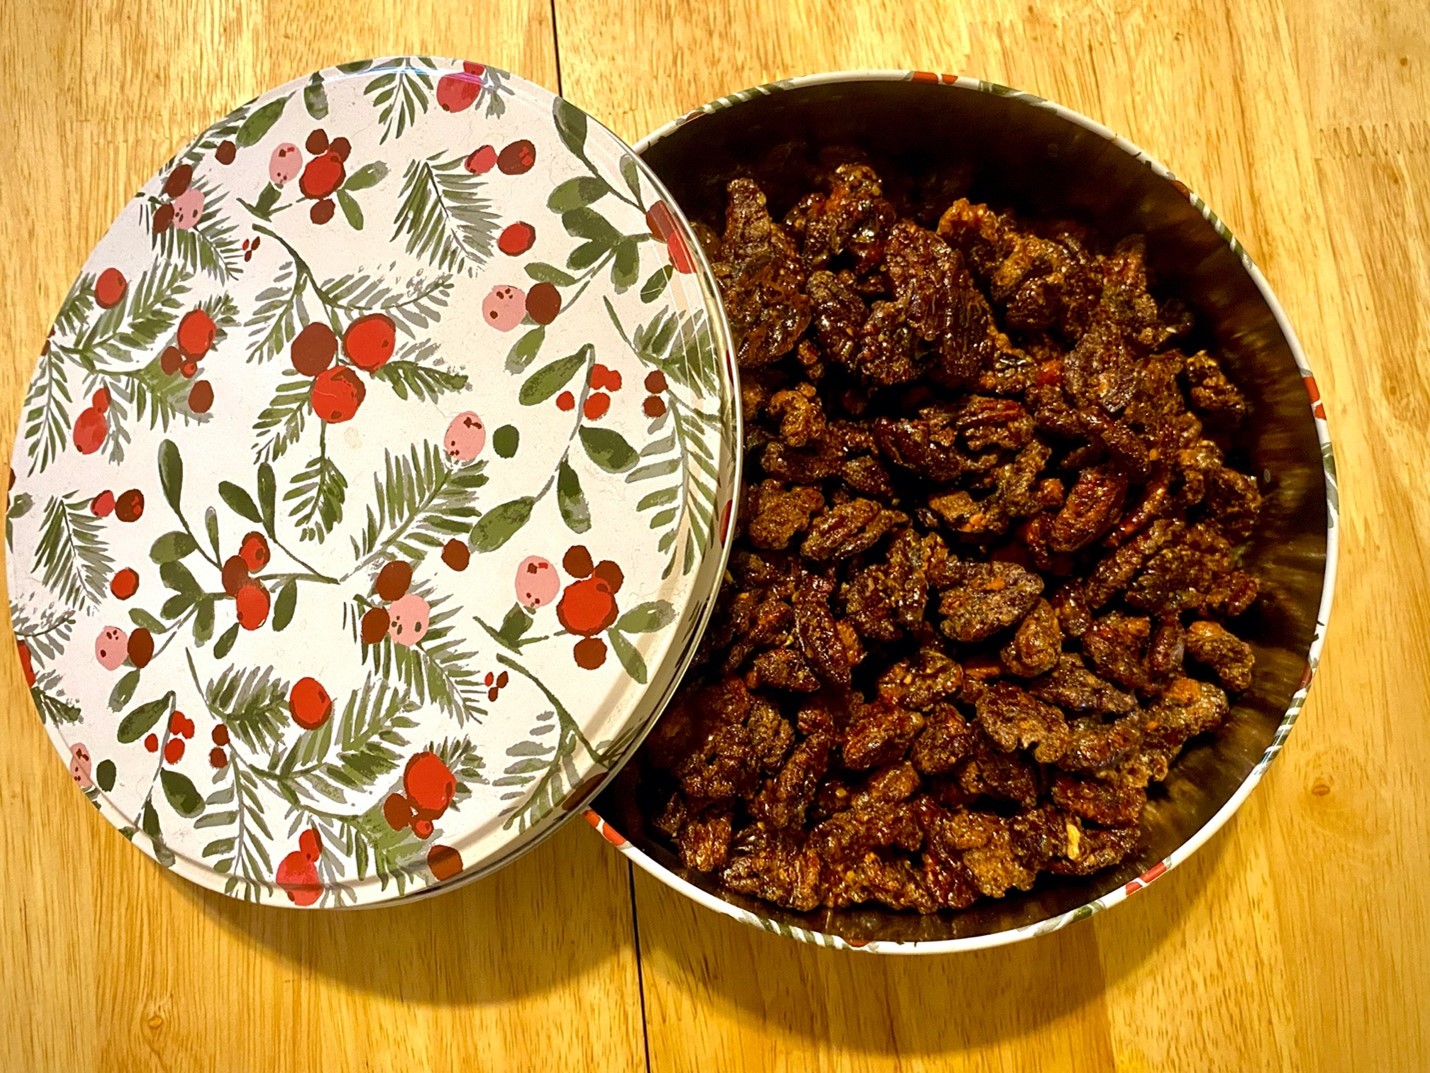 Chinese 5 Spice Candied Nuts